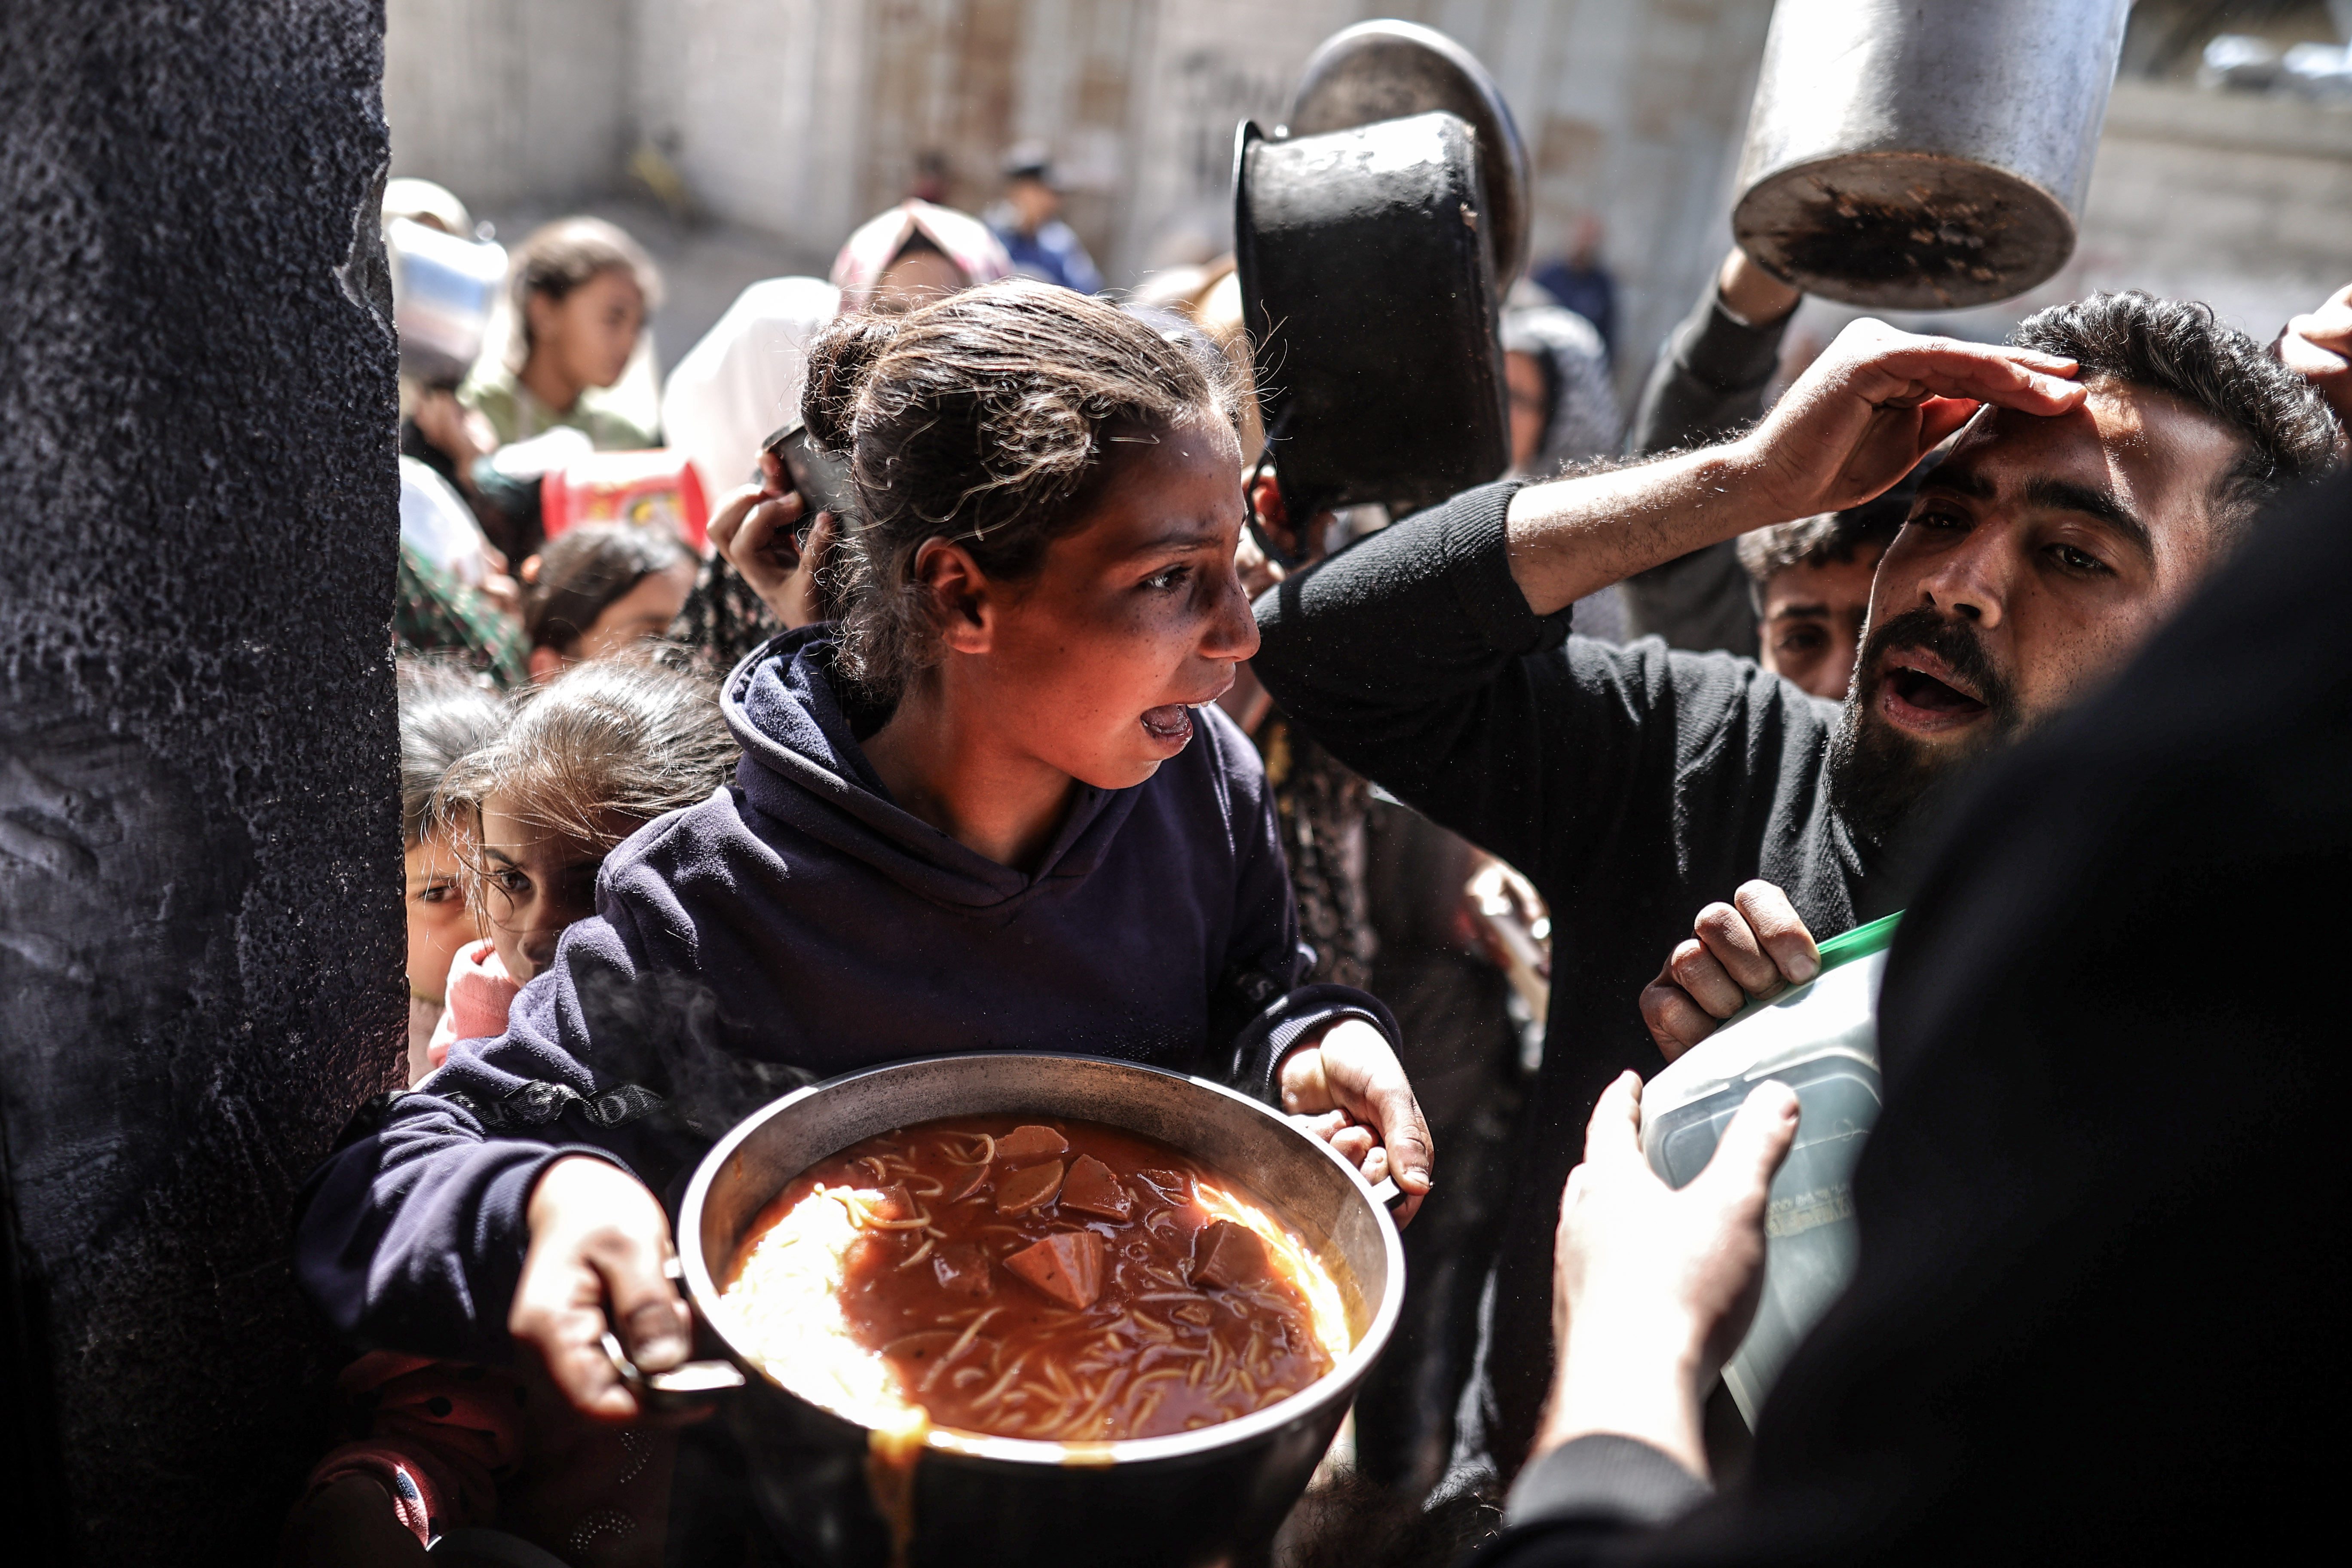 A girl holds a pot of food while being jostled by a crowd.